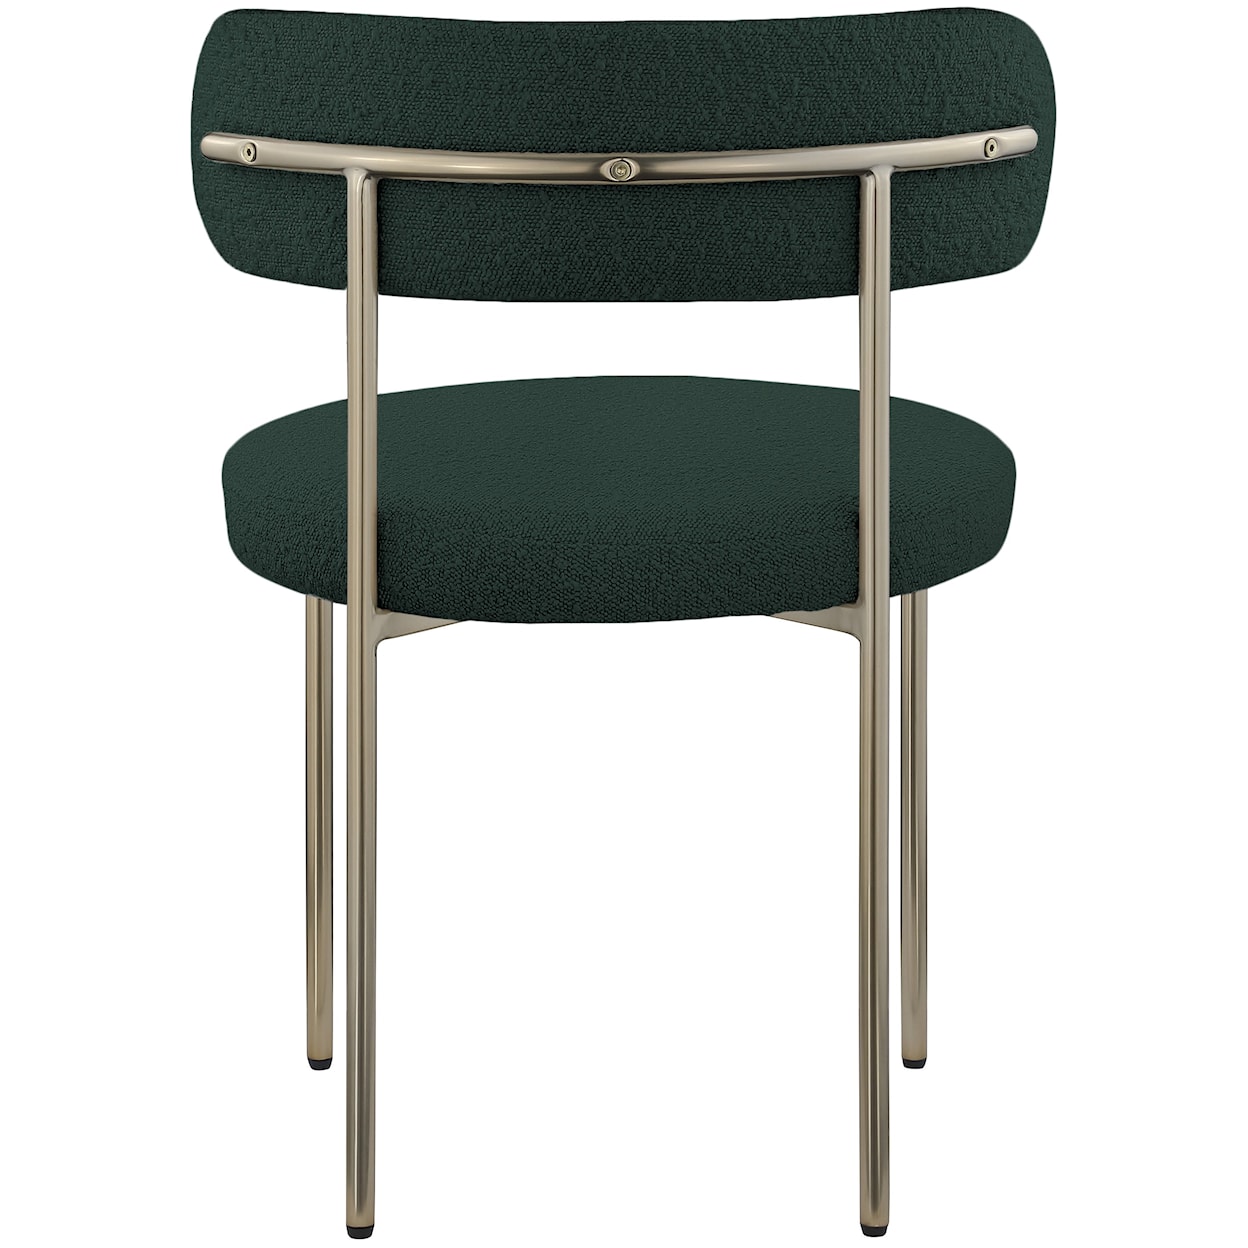 Meridian Furniture Beacon Fabric Dining Chair with Brass Iron Frame